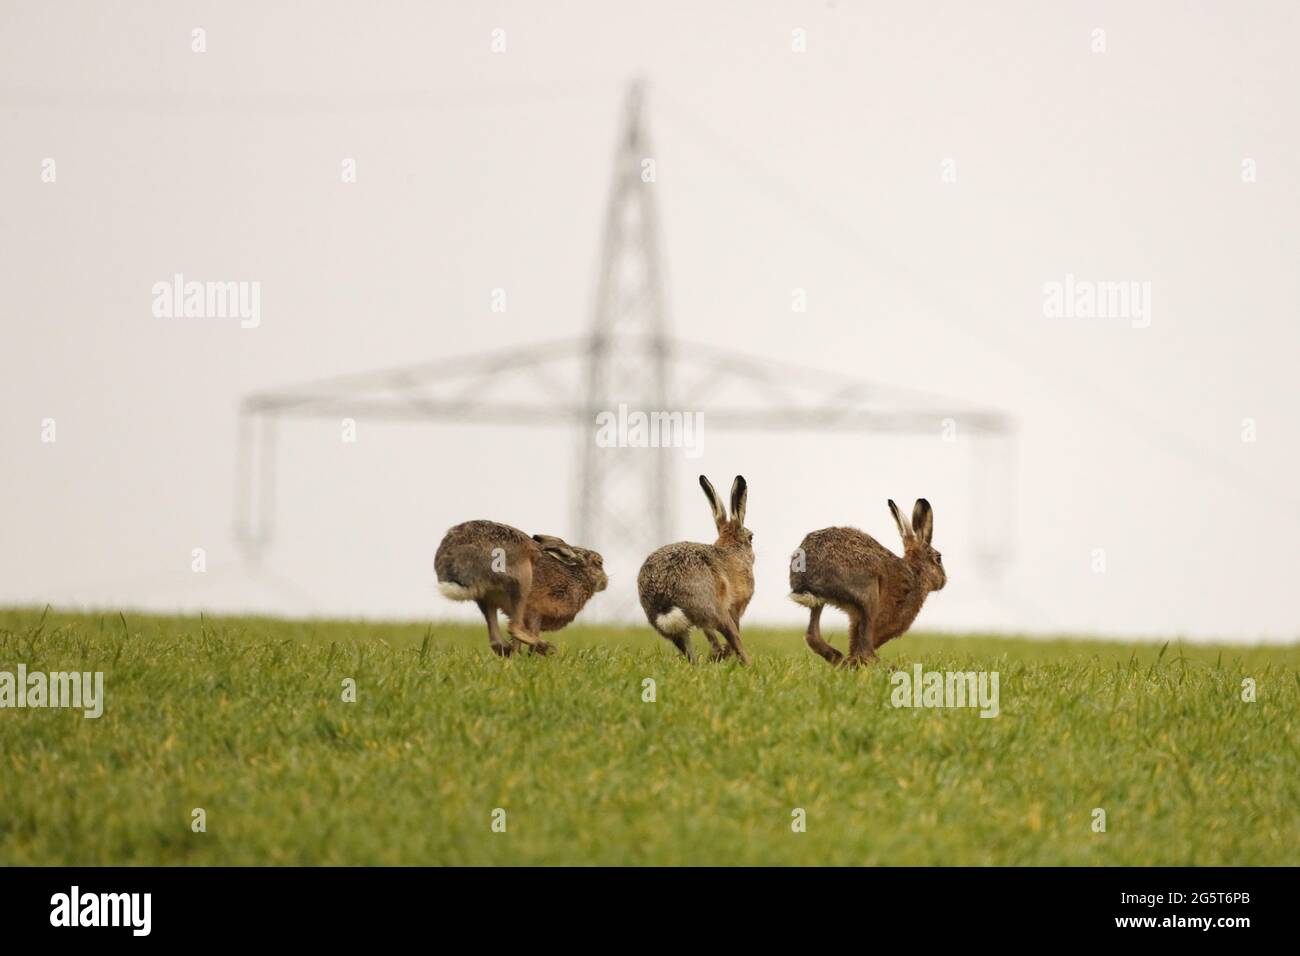 European hare, Brown hare (Lepus europaeus), three running hares in a field in front of a power pole, Germany, Baden-Wuerttemberg Stock Photo